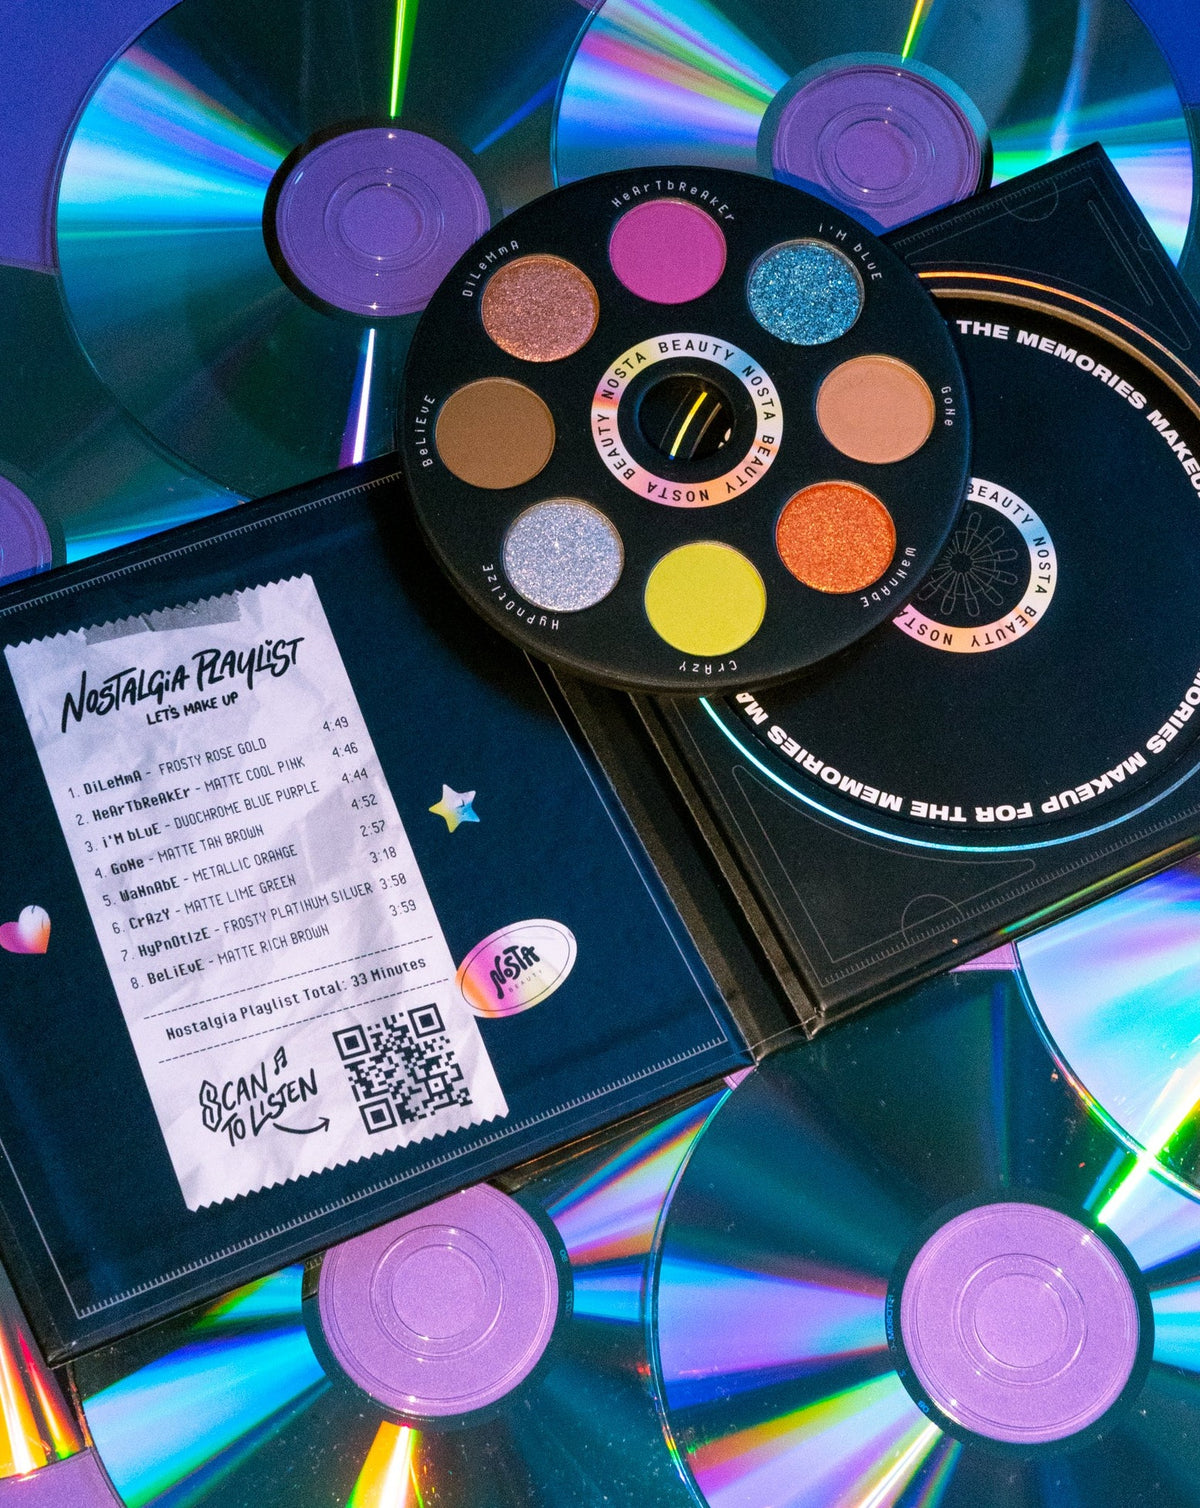 Adorably packaged CD case eyeshadow palette with 8 nostalgic hit songs from the 90s &amp; 2000s listed on left as inspiration for shades.